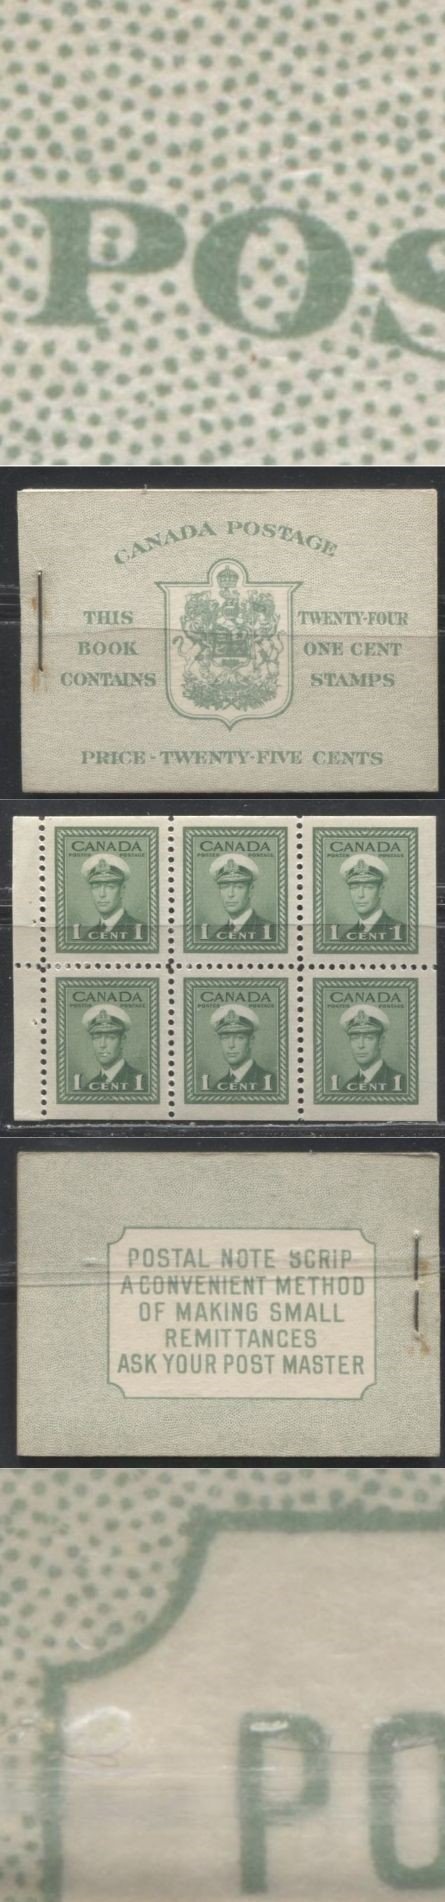 Lot 250 Canada #BK32f 1942-1949 War Issue, Complete 25¢ English Booklet, 4 Panes of 1c Green,  Ribbed Vertical Wove Paper, Harris Front Cover Type IIb, Back Cover Type Cbiii, 7c & 6c Airmail Rates Page